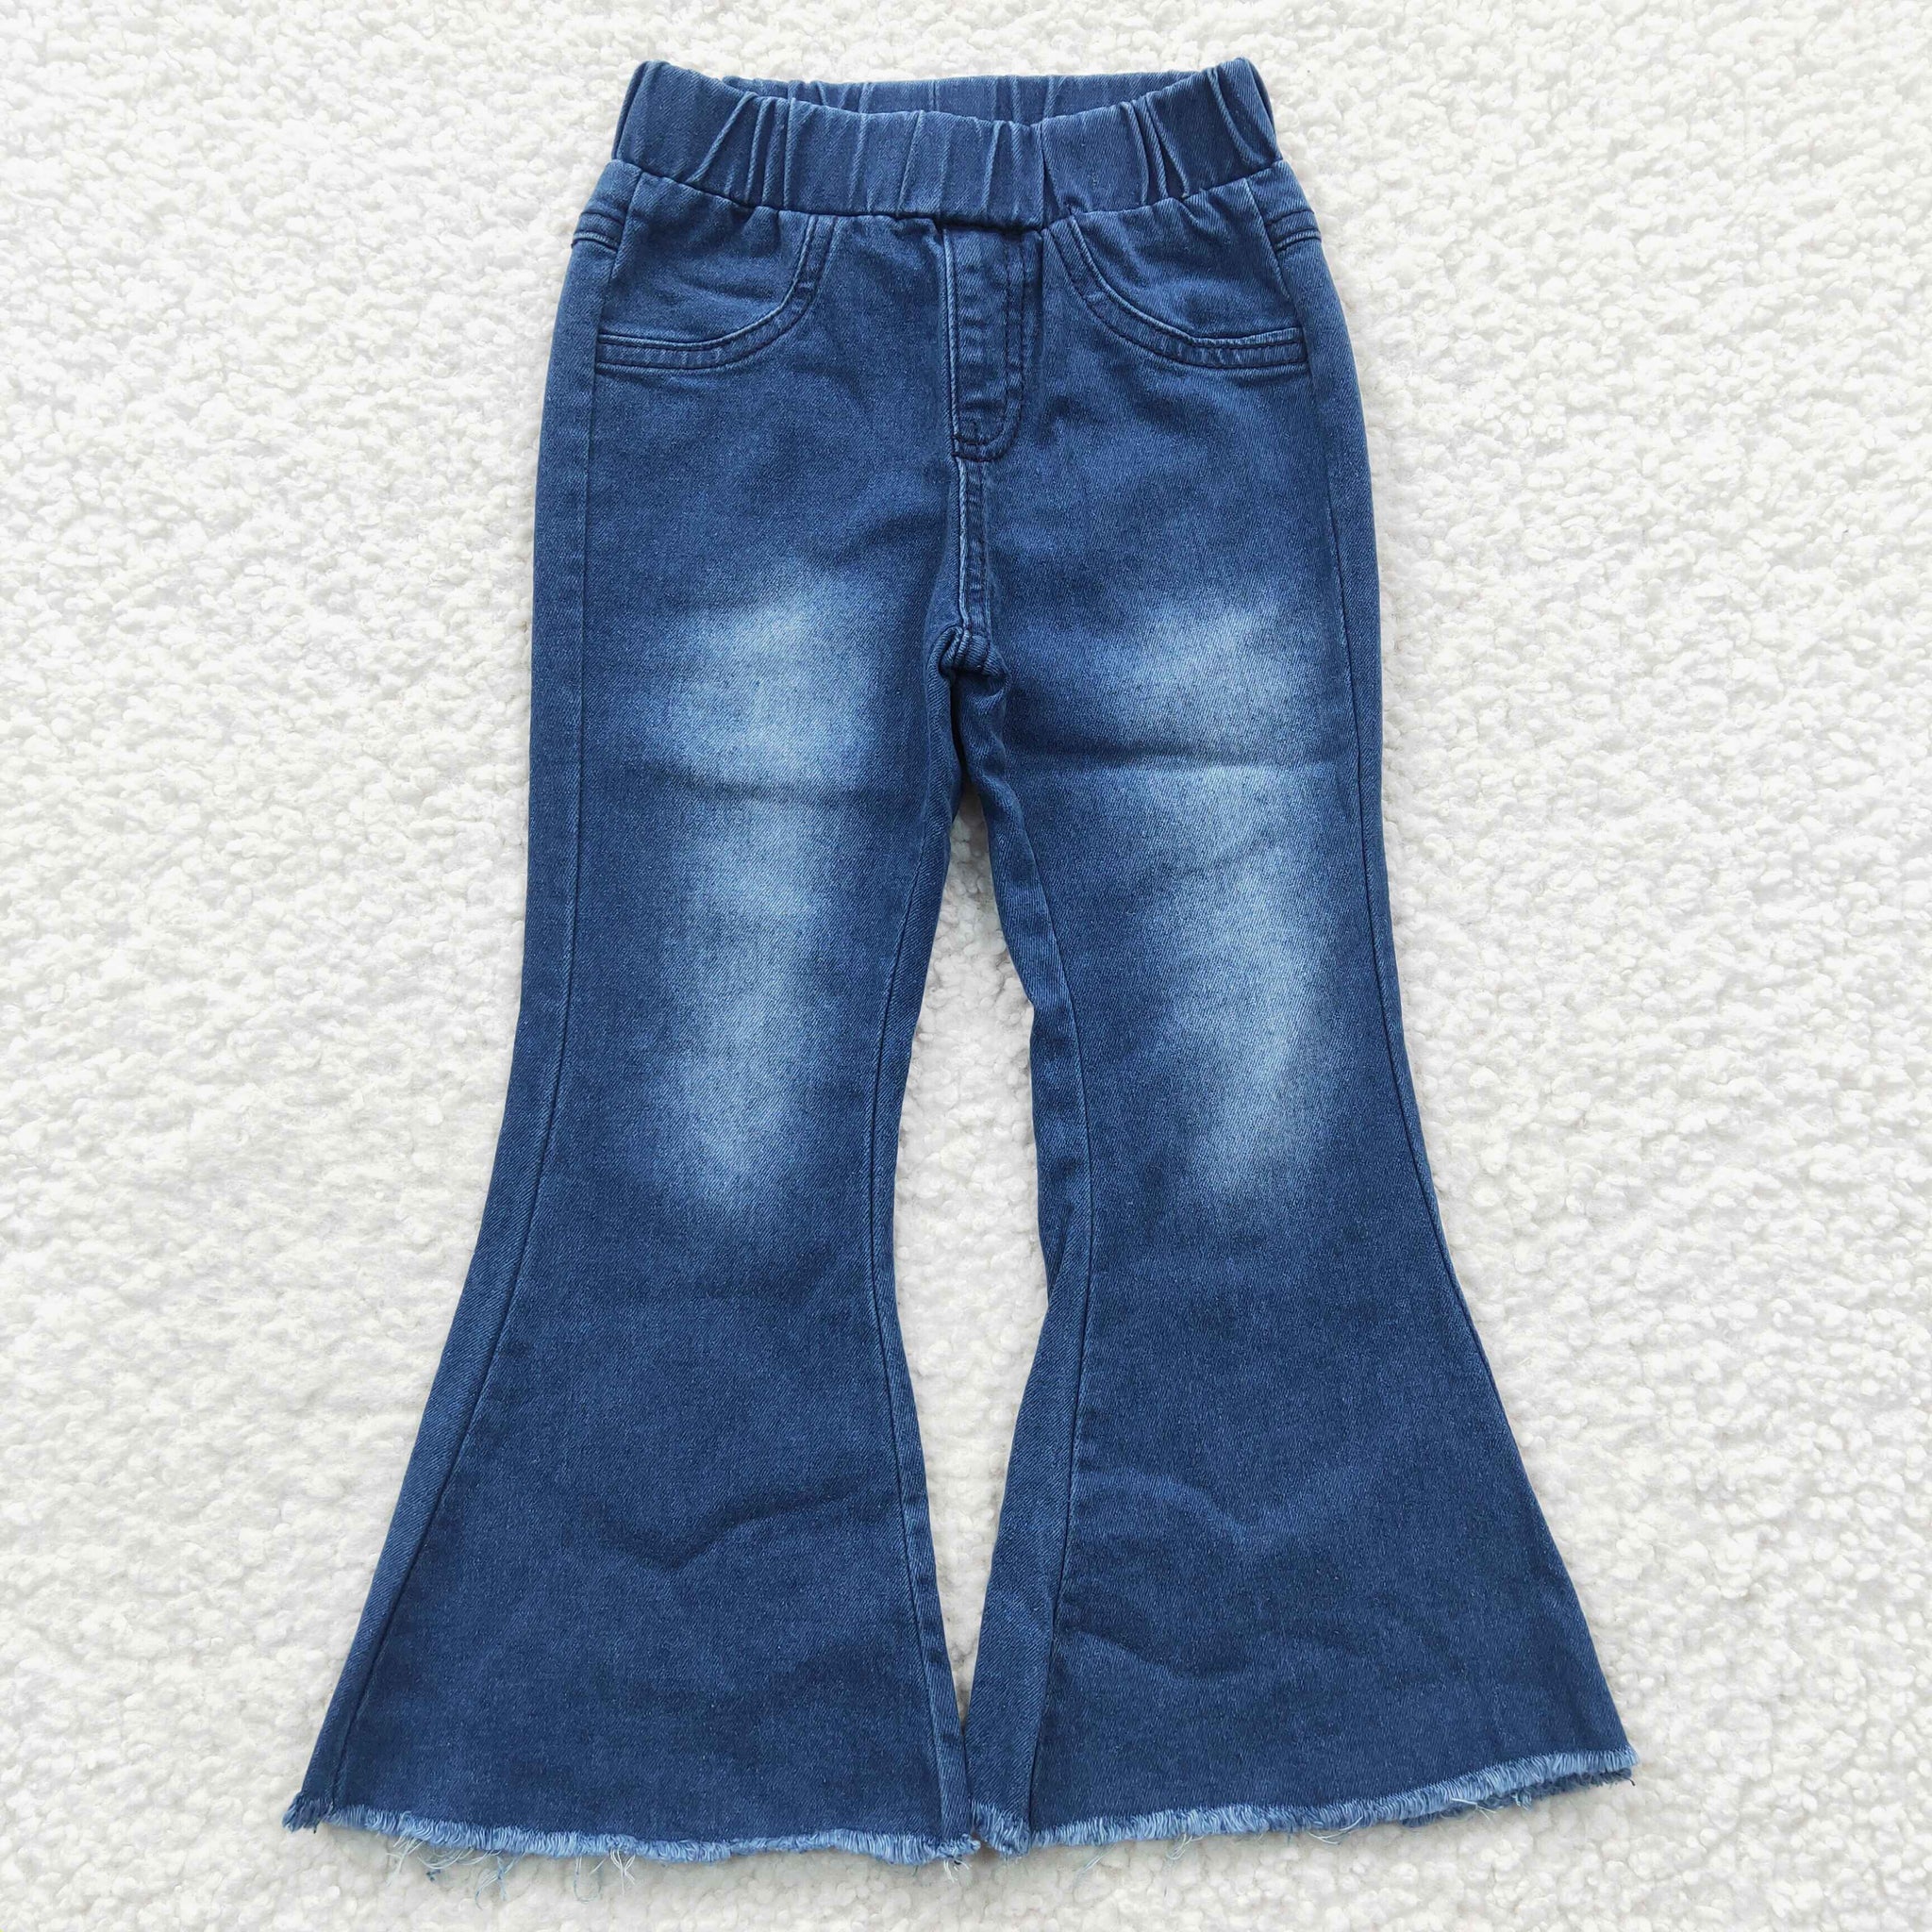 P0070 kids clothes girls blue bell bottom jeans flare pant